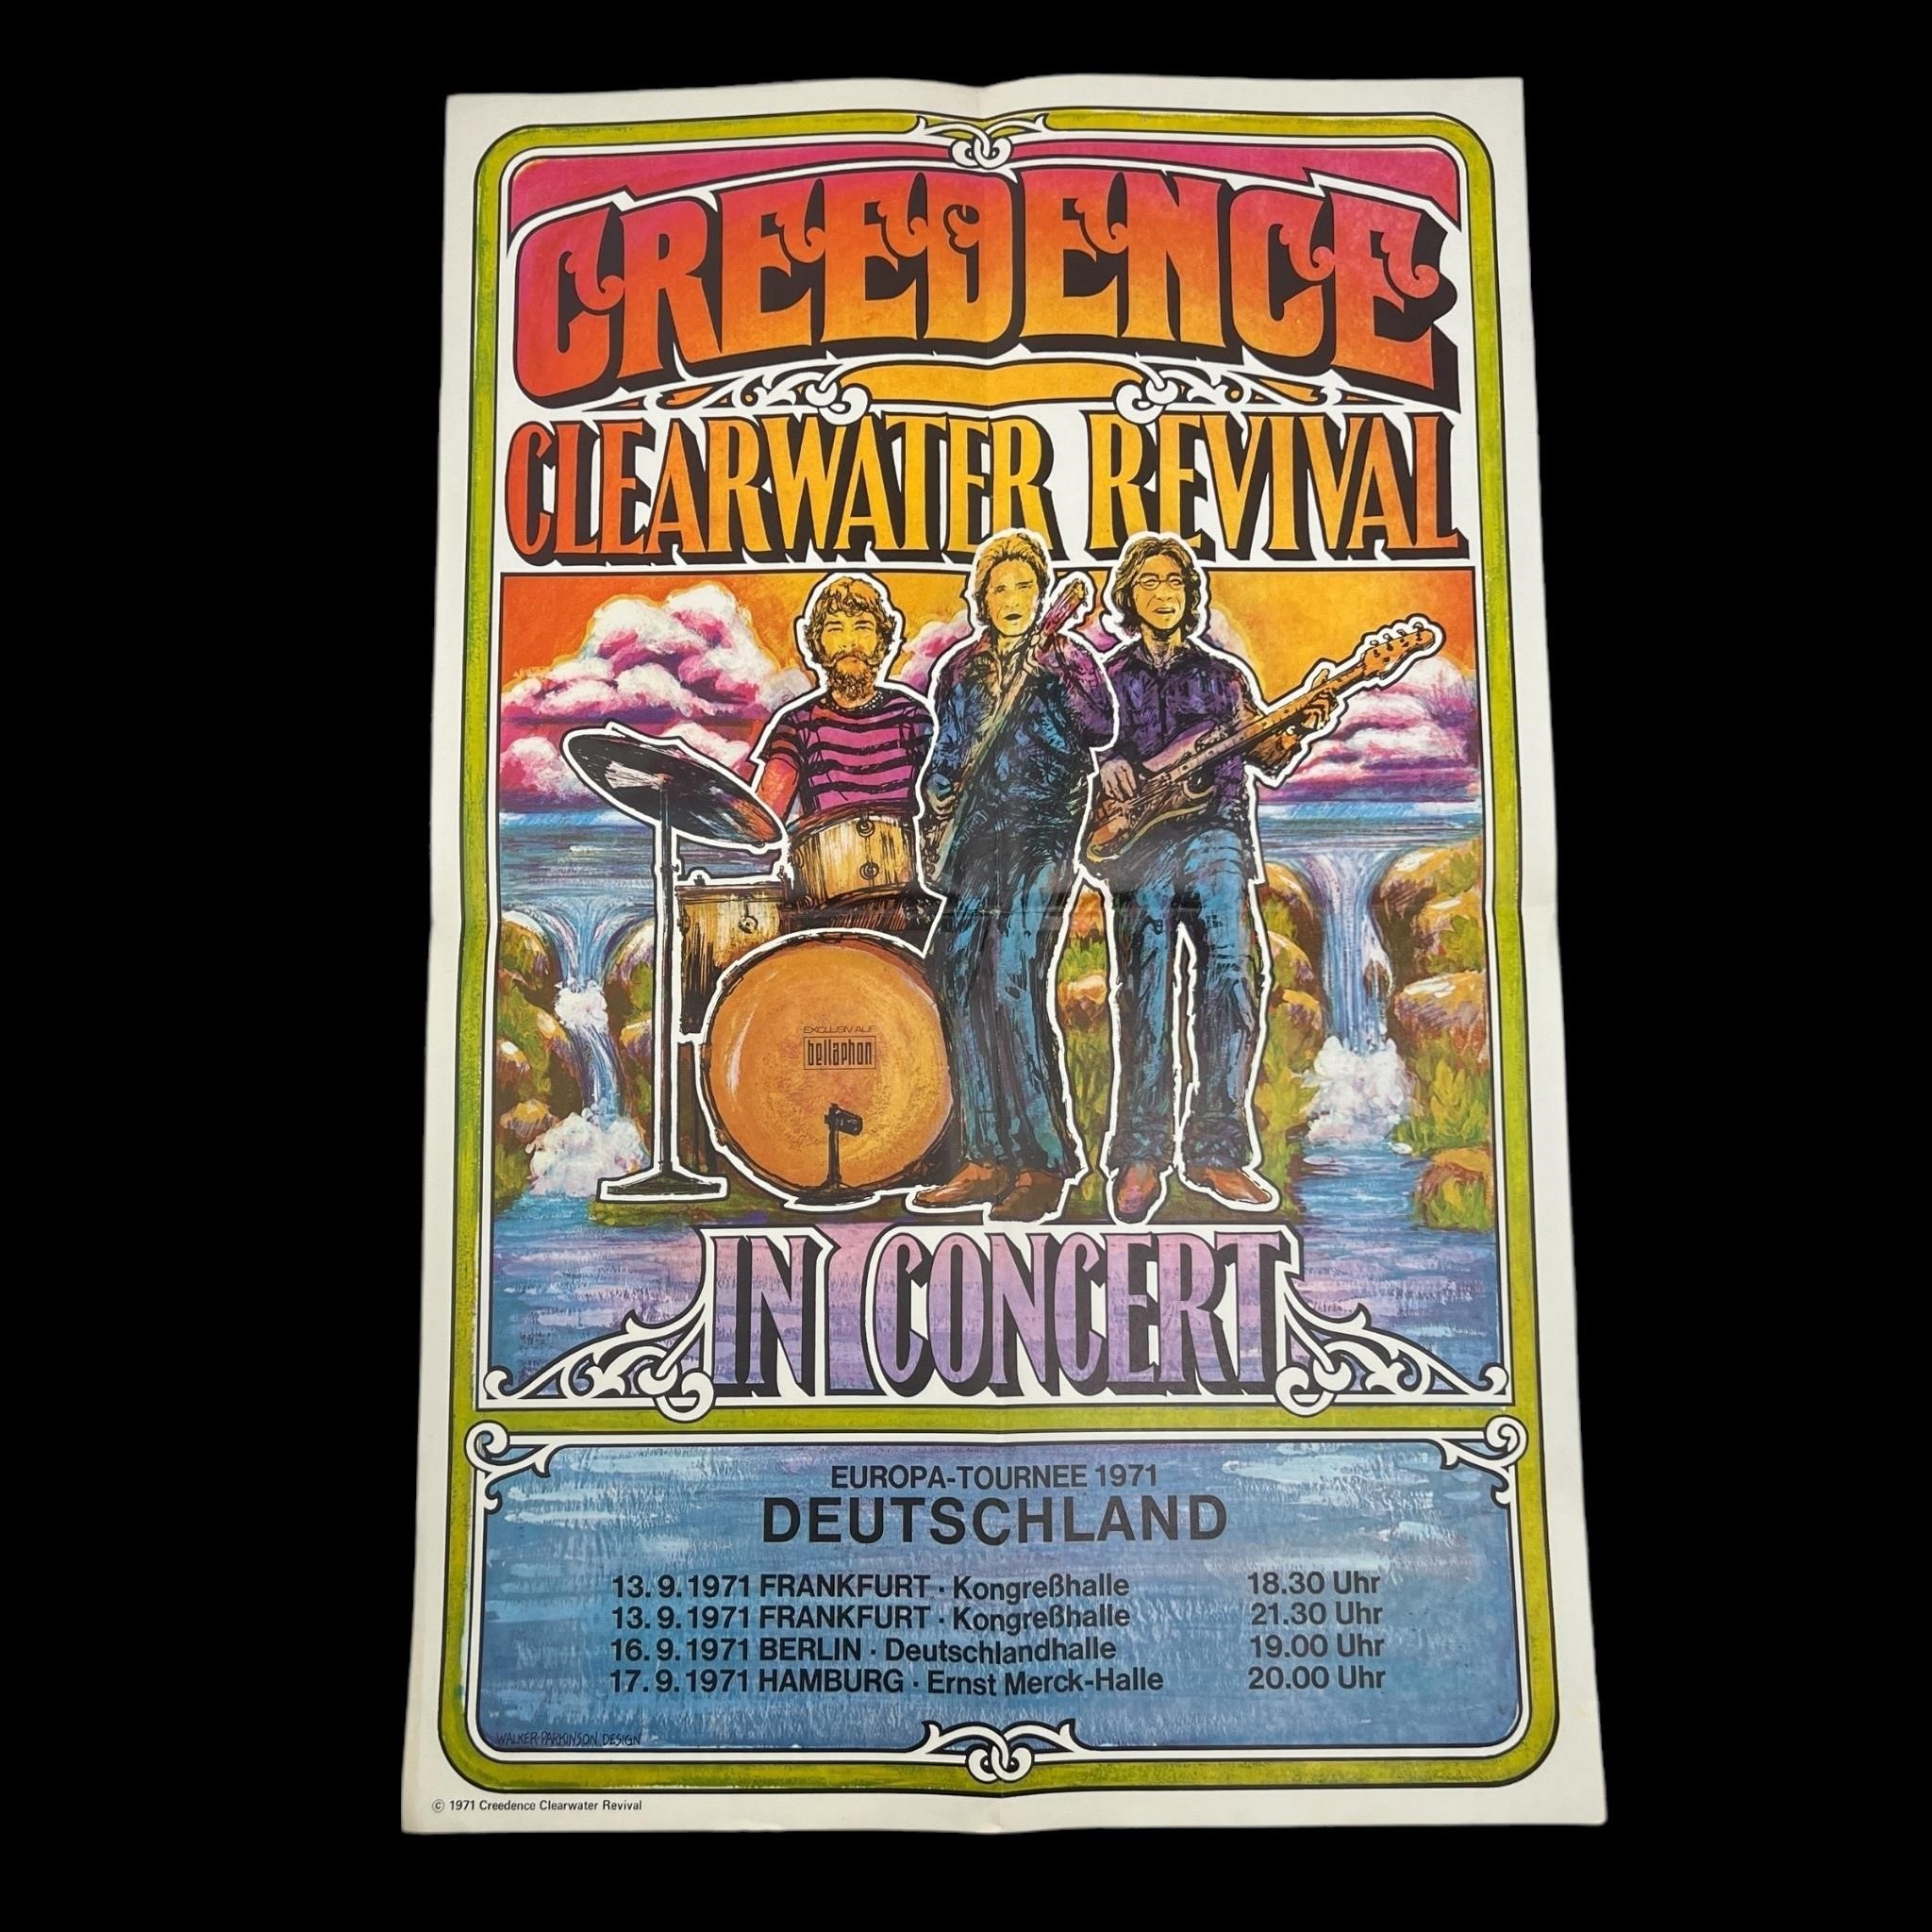 1971 Creedence Clearwater Revival Poster